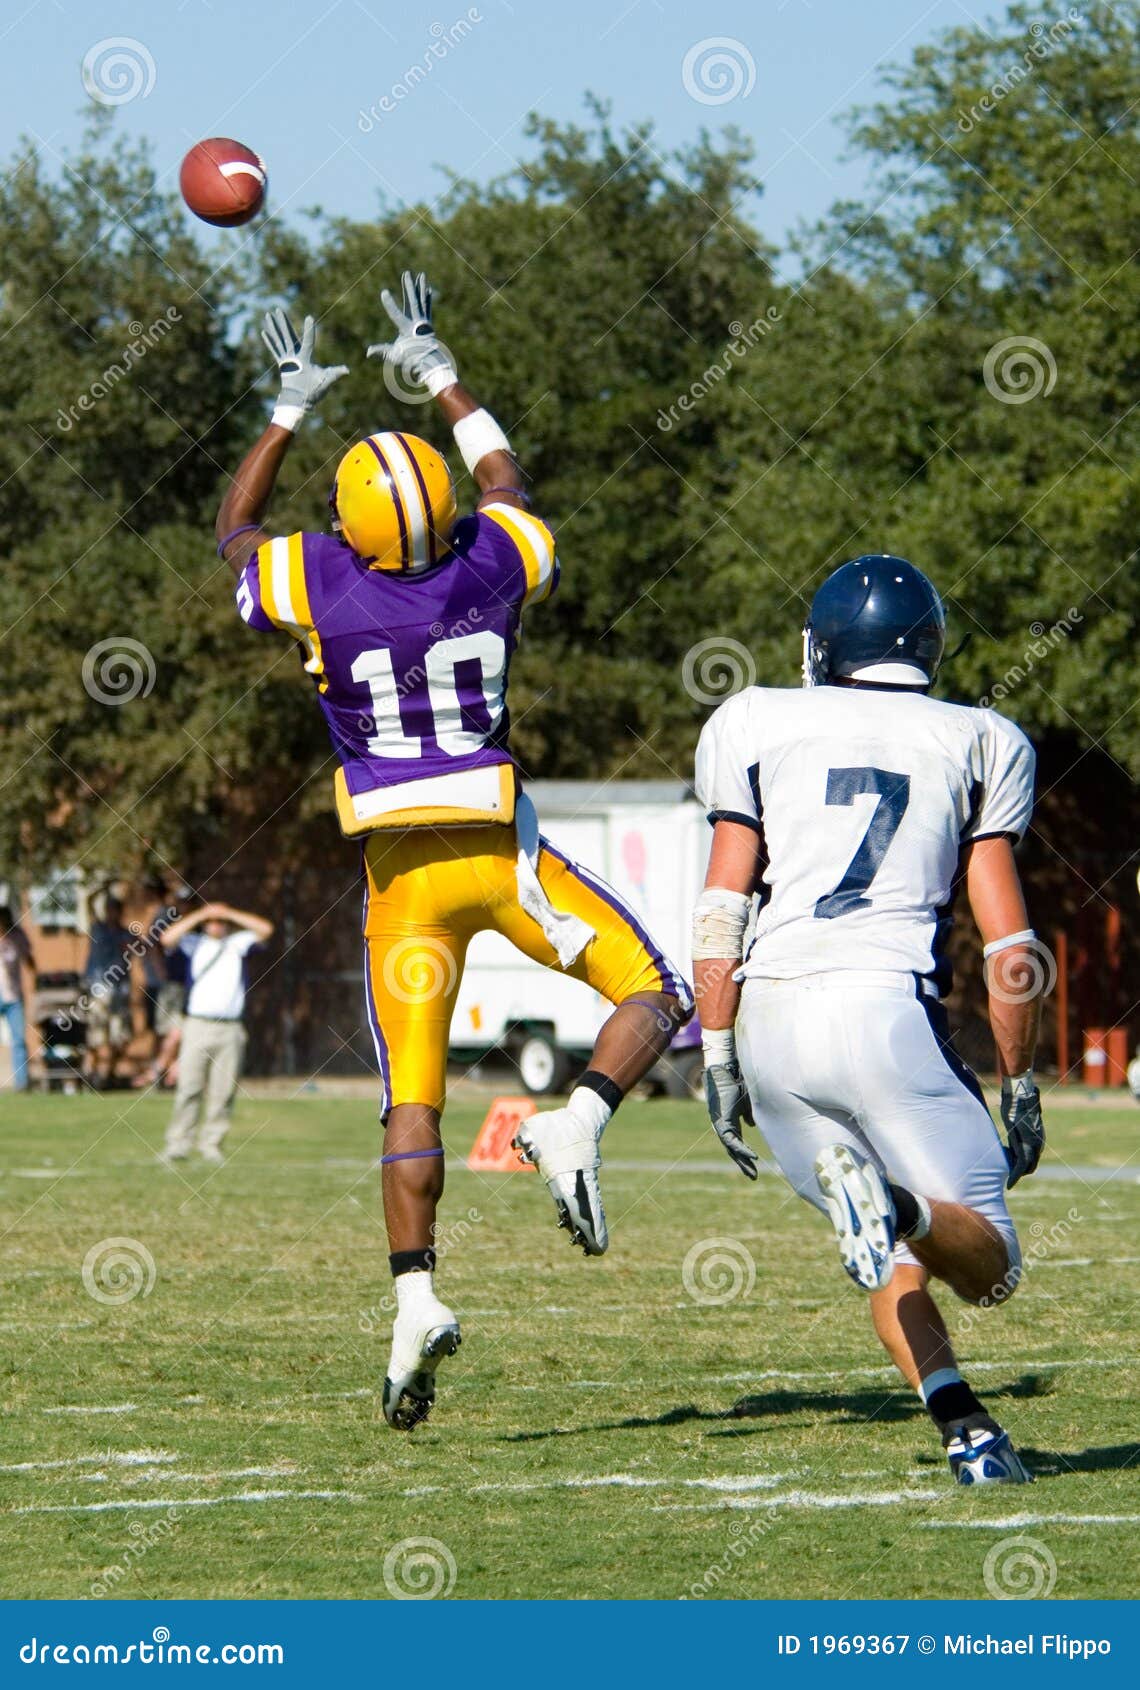 American Football Played By Young Men Stock Image - Image: 1969367